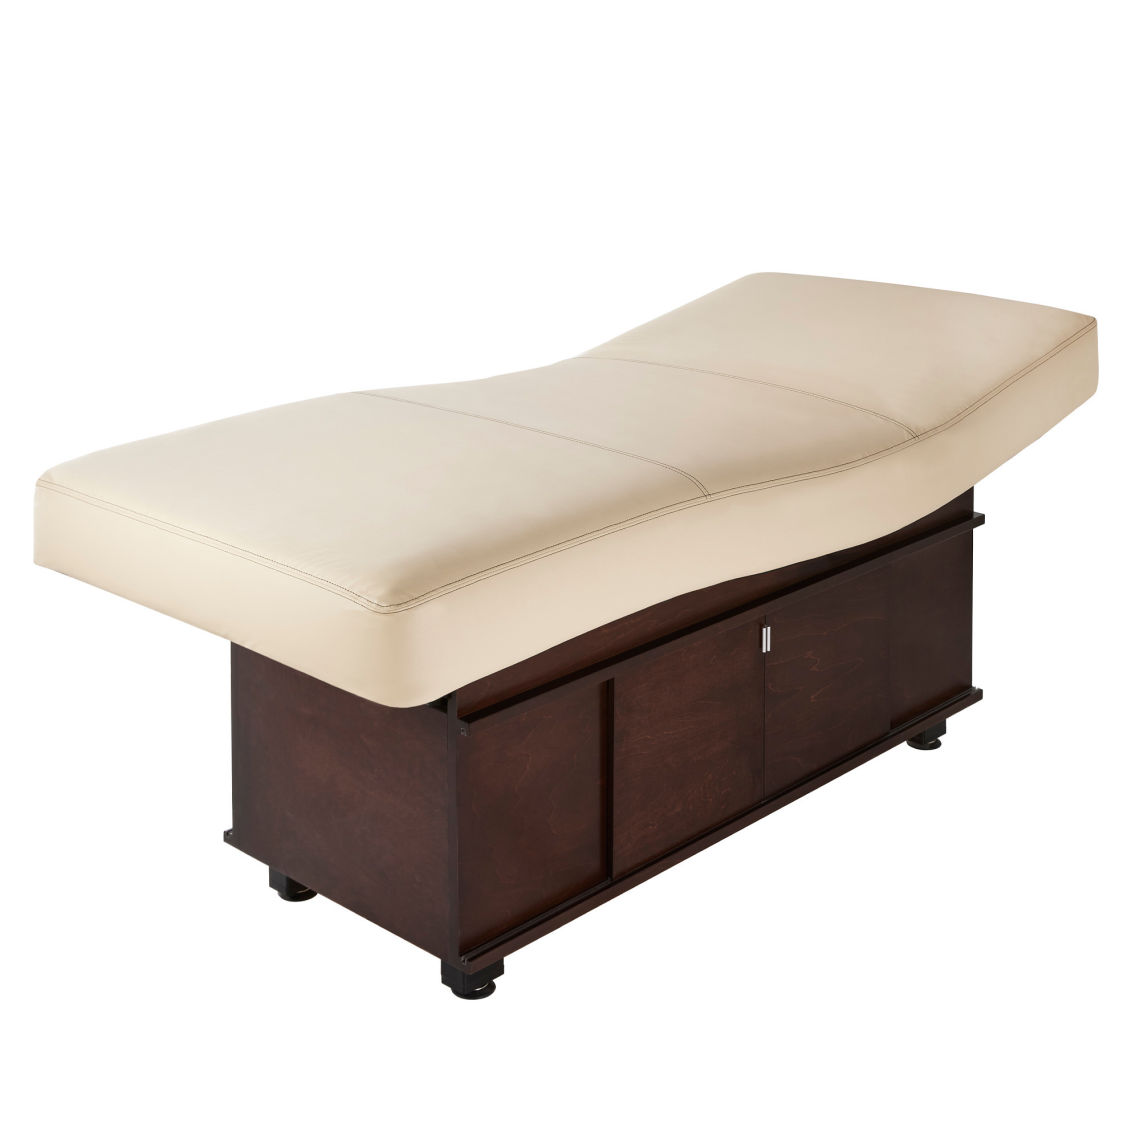 Insignia Classic™ Multi-purpose treatment table with replaceable mattress